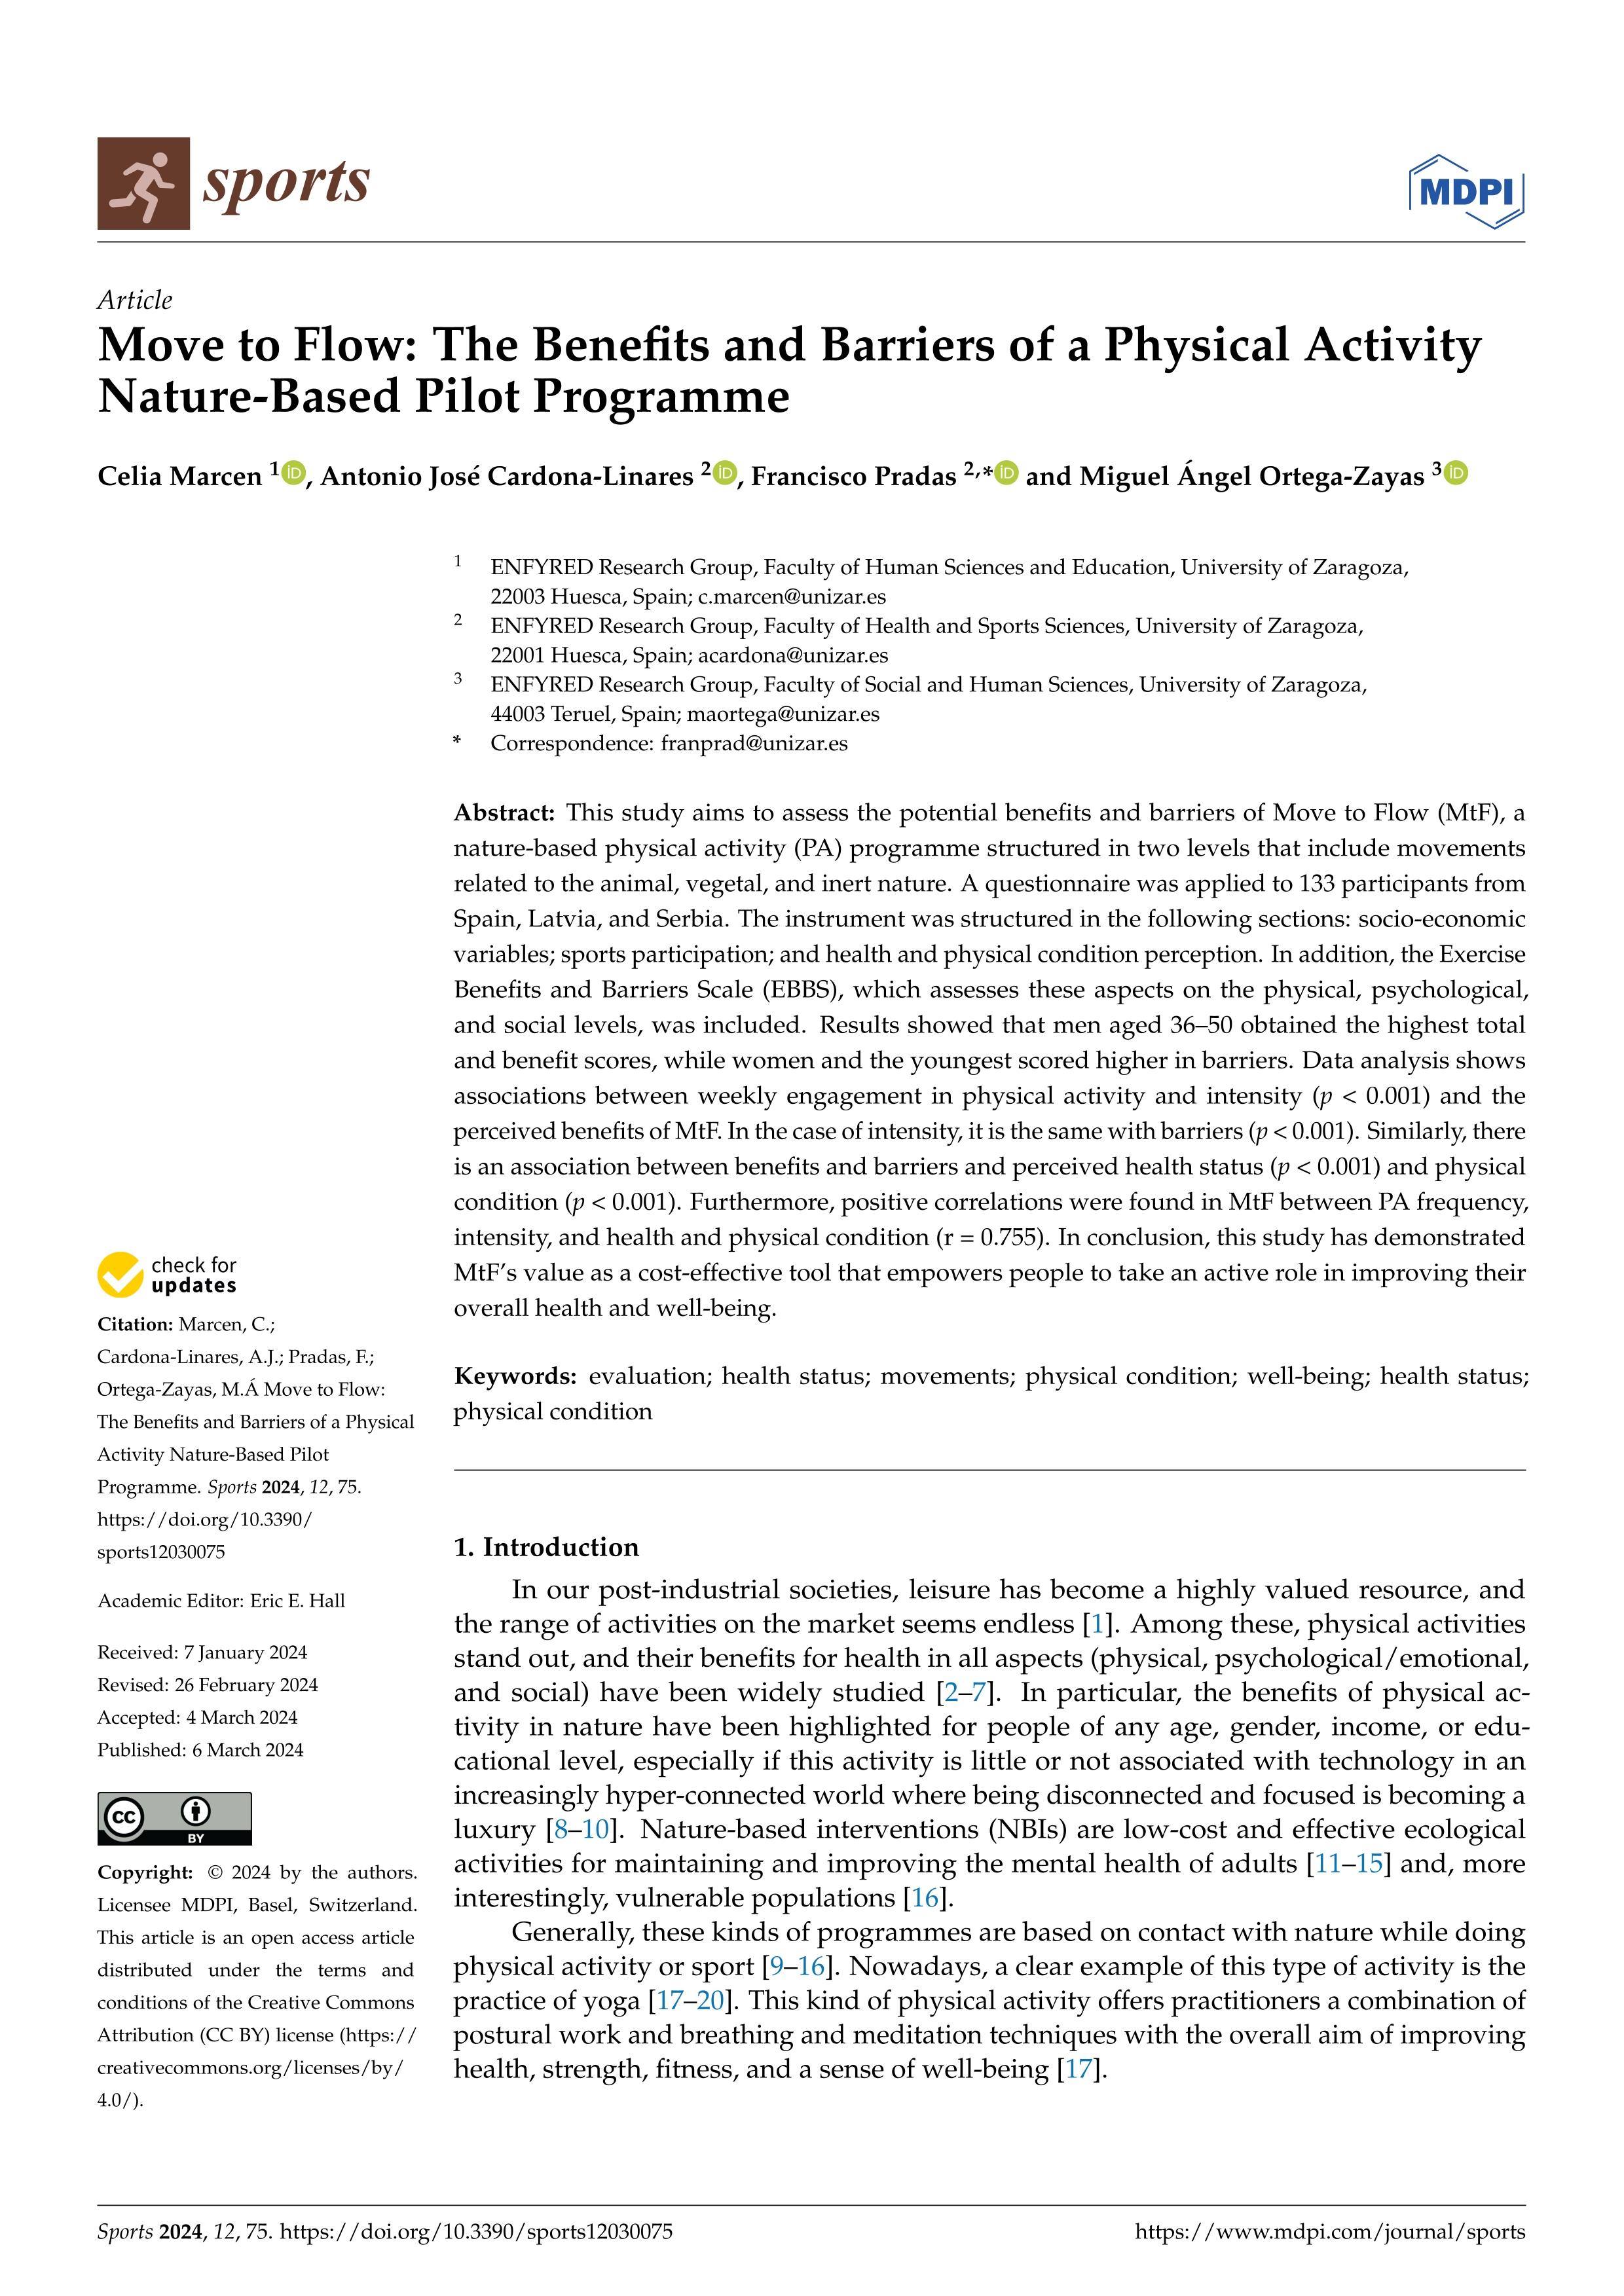 Move to Flow: The Benefits and Barriers of a Physical Activity Nature-Based Pilot Programme